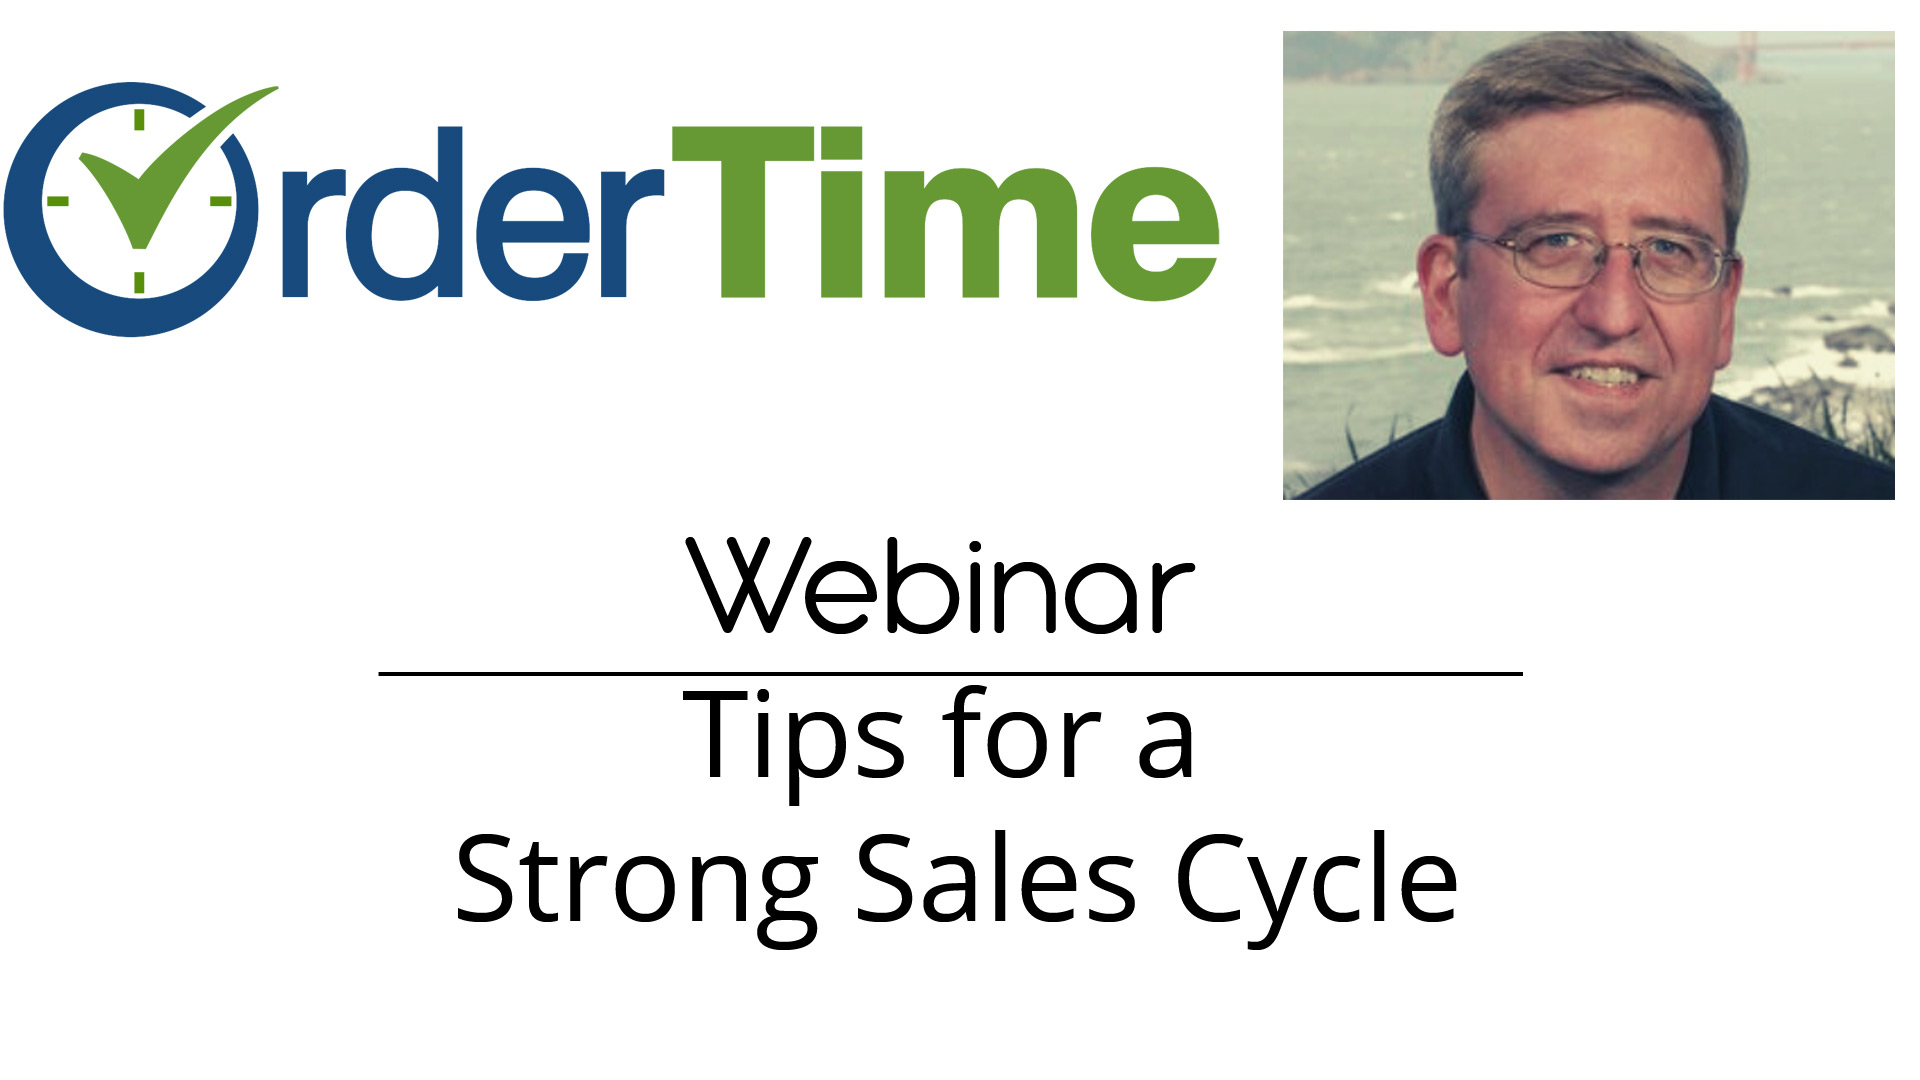 Webinar on Tips for a Strong Sales Cycle in 2021